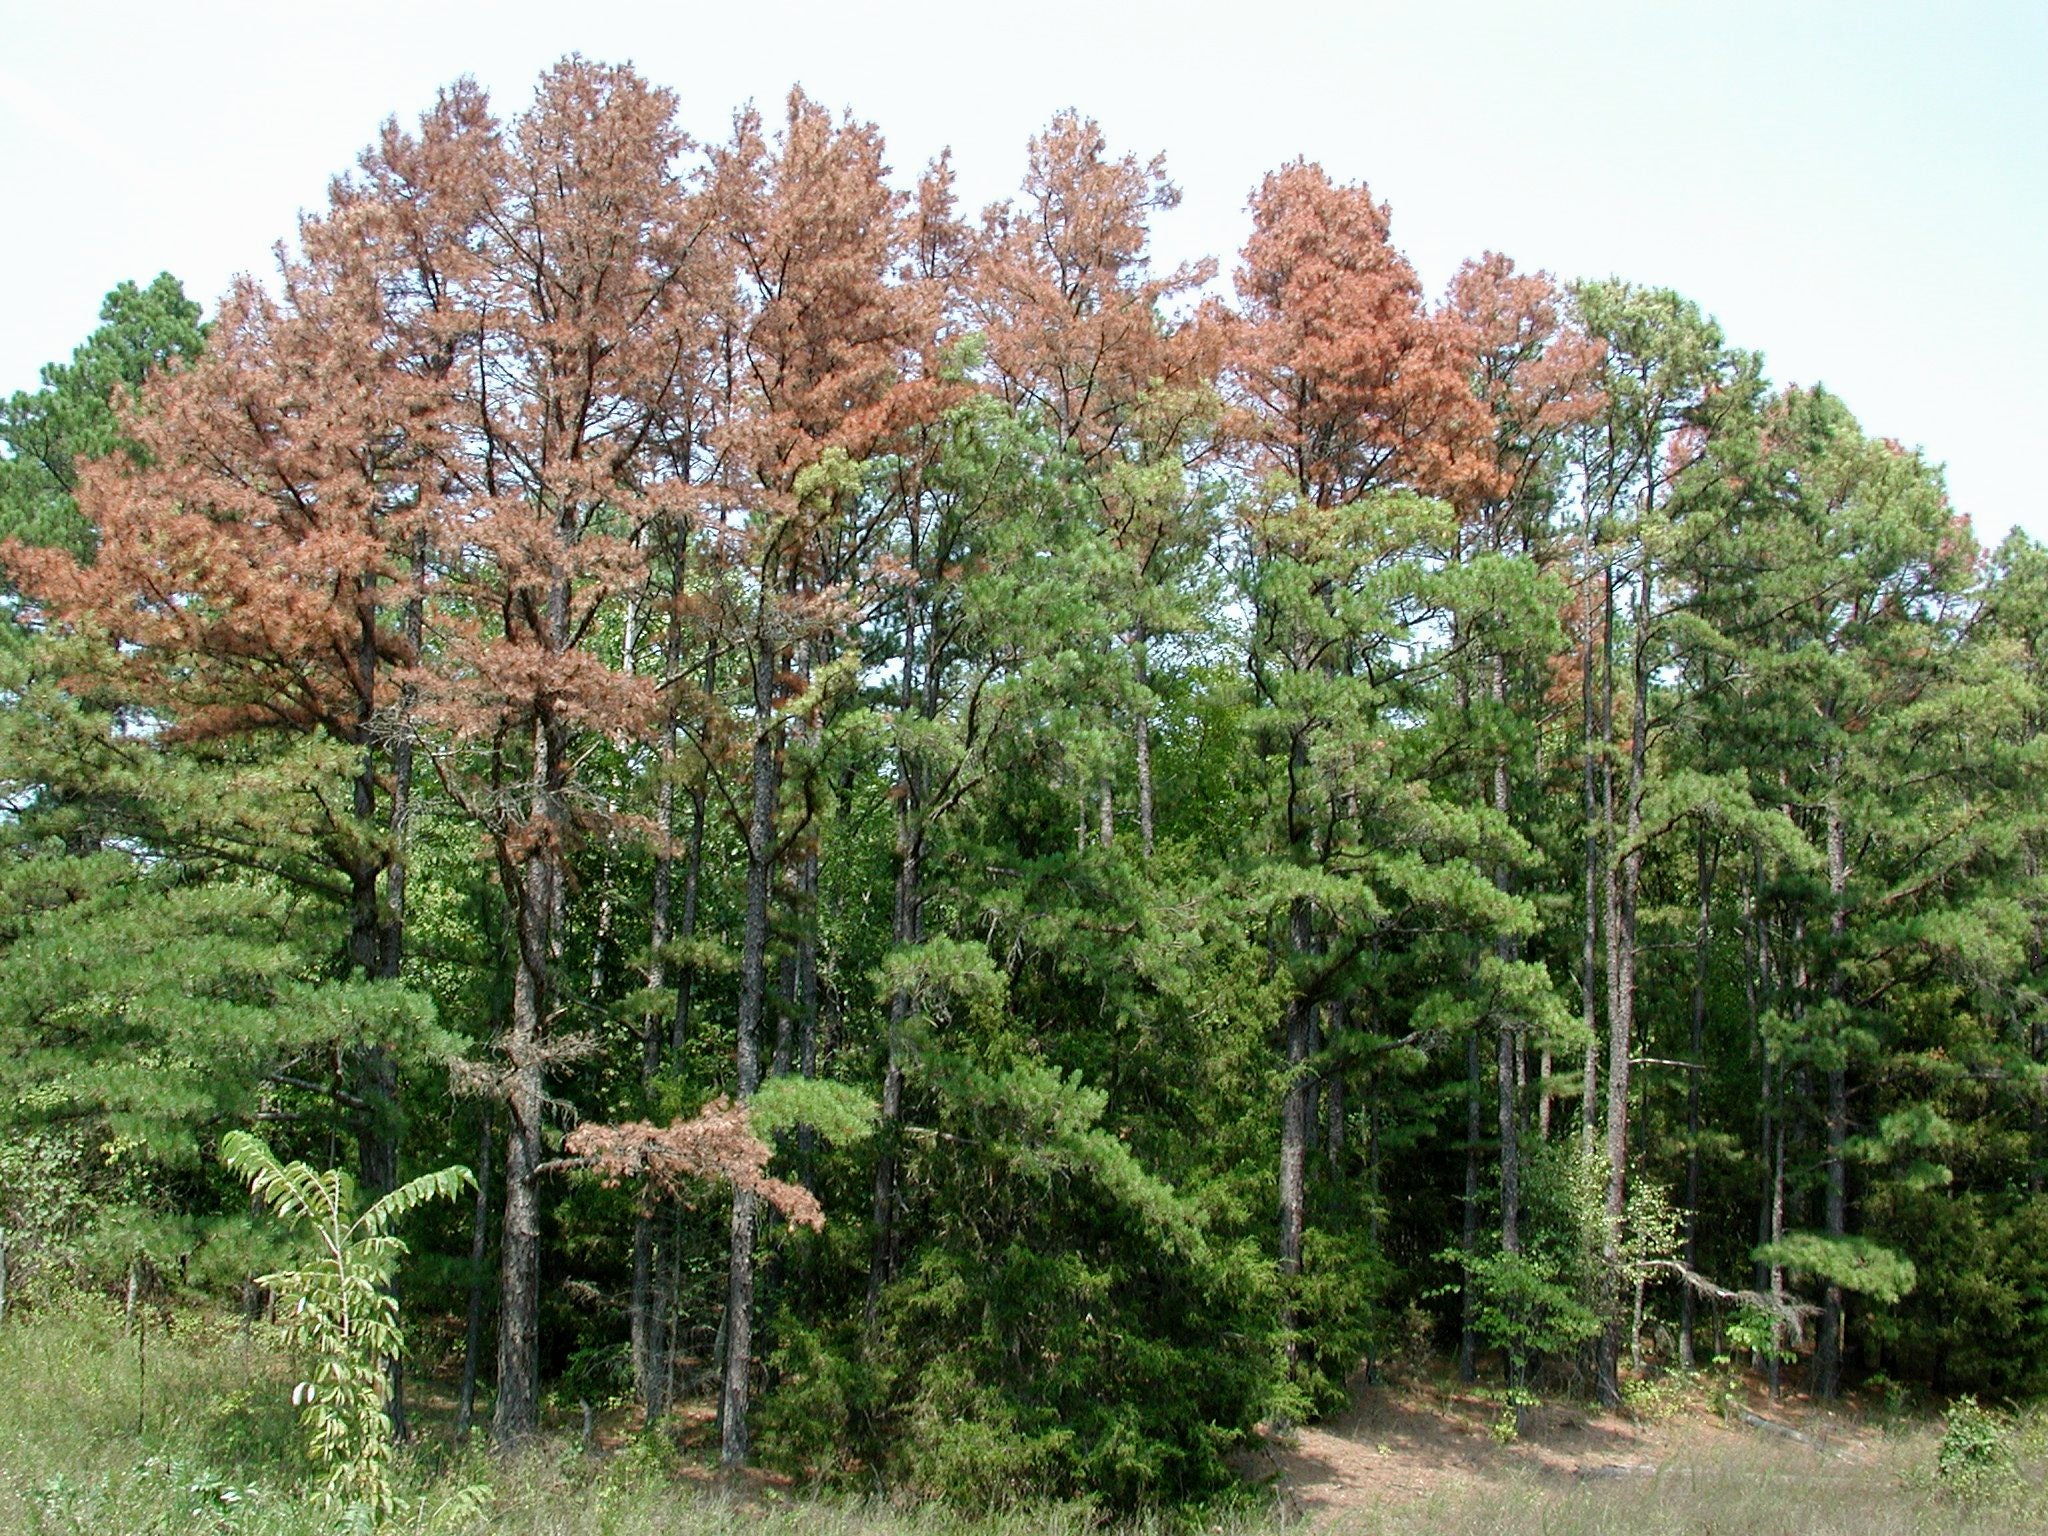 Stand of shortleaf pines where tops of some trees have turned orange-brown